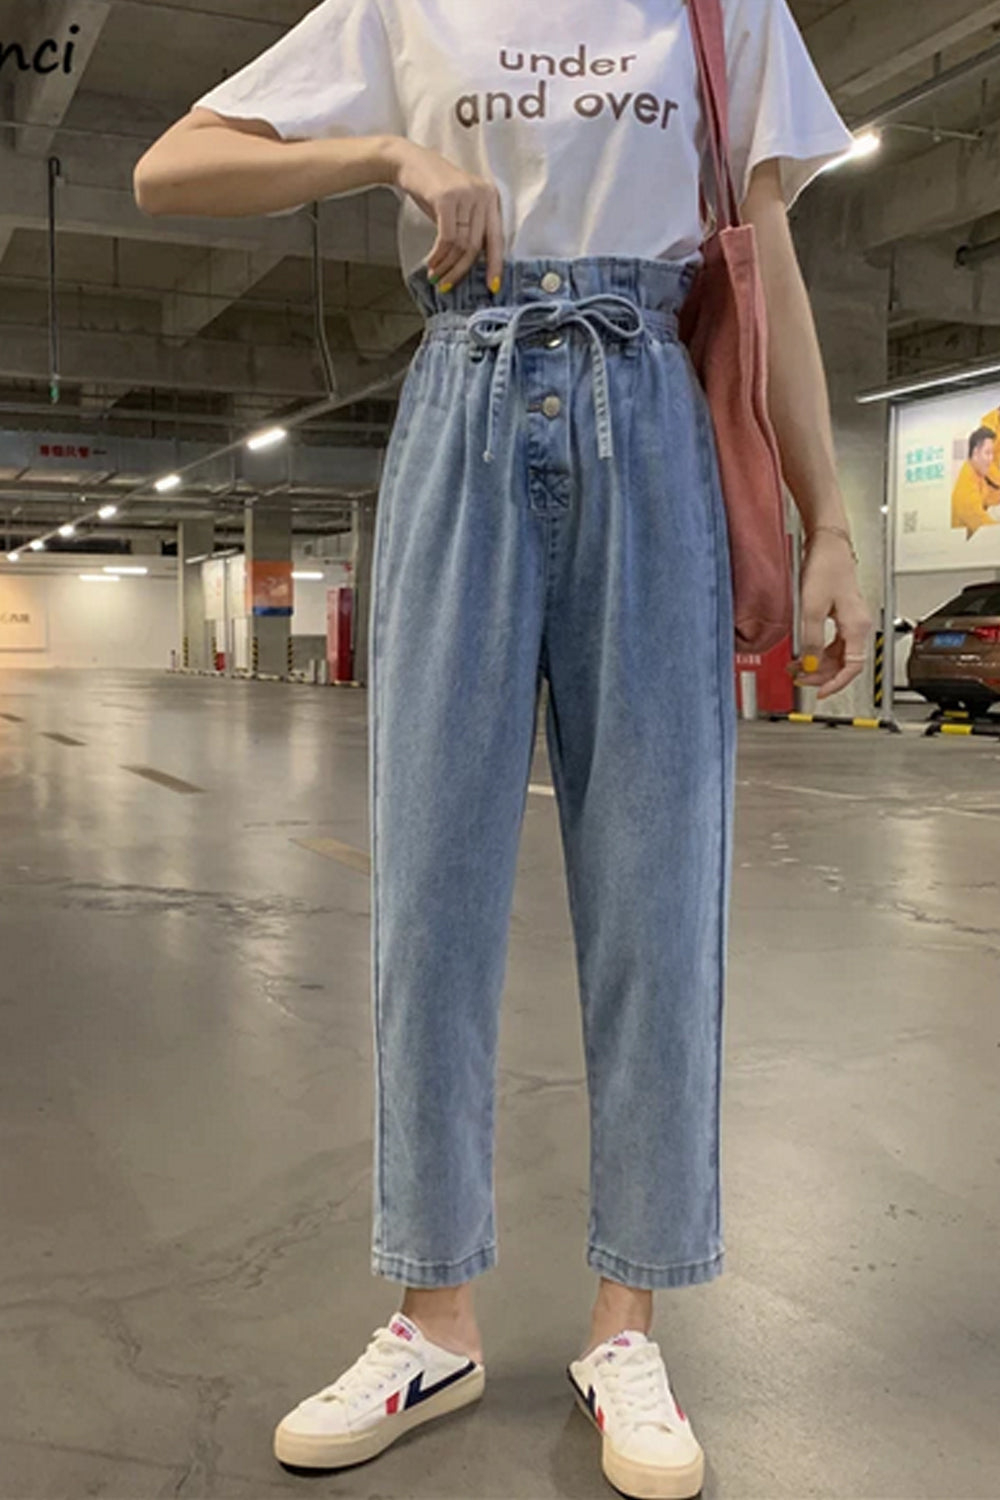 High Waist Sashes Bow Tie Long Jeans Pants